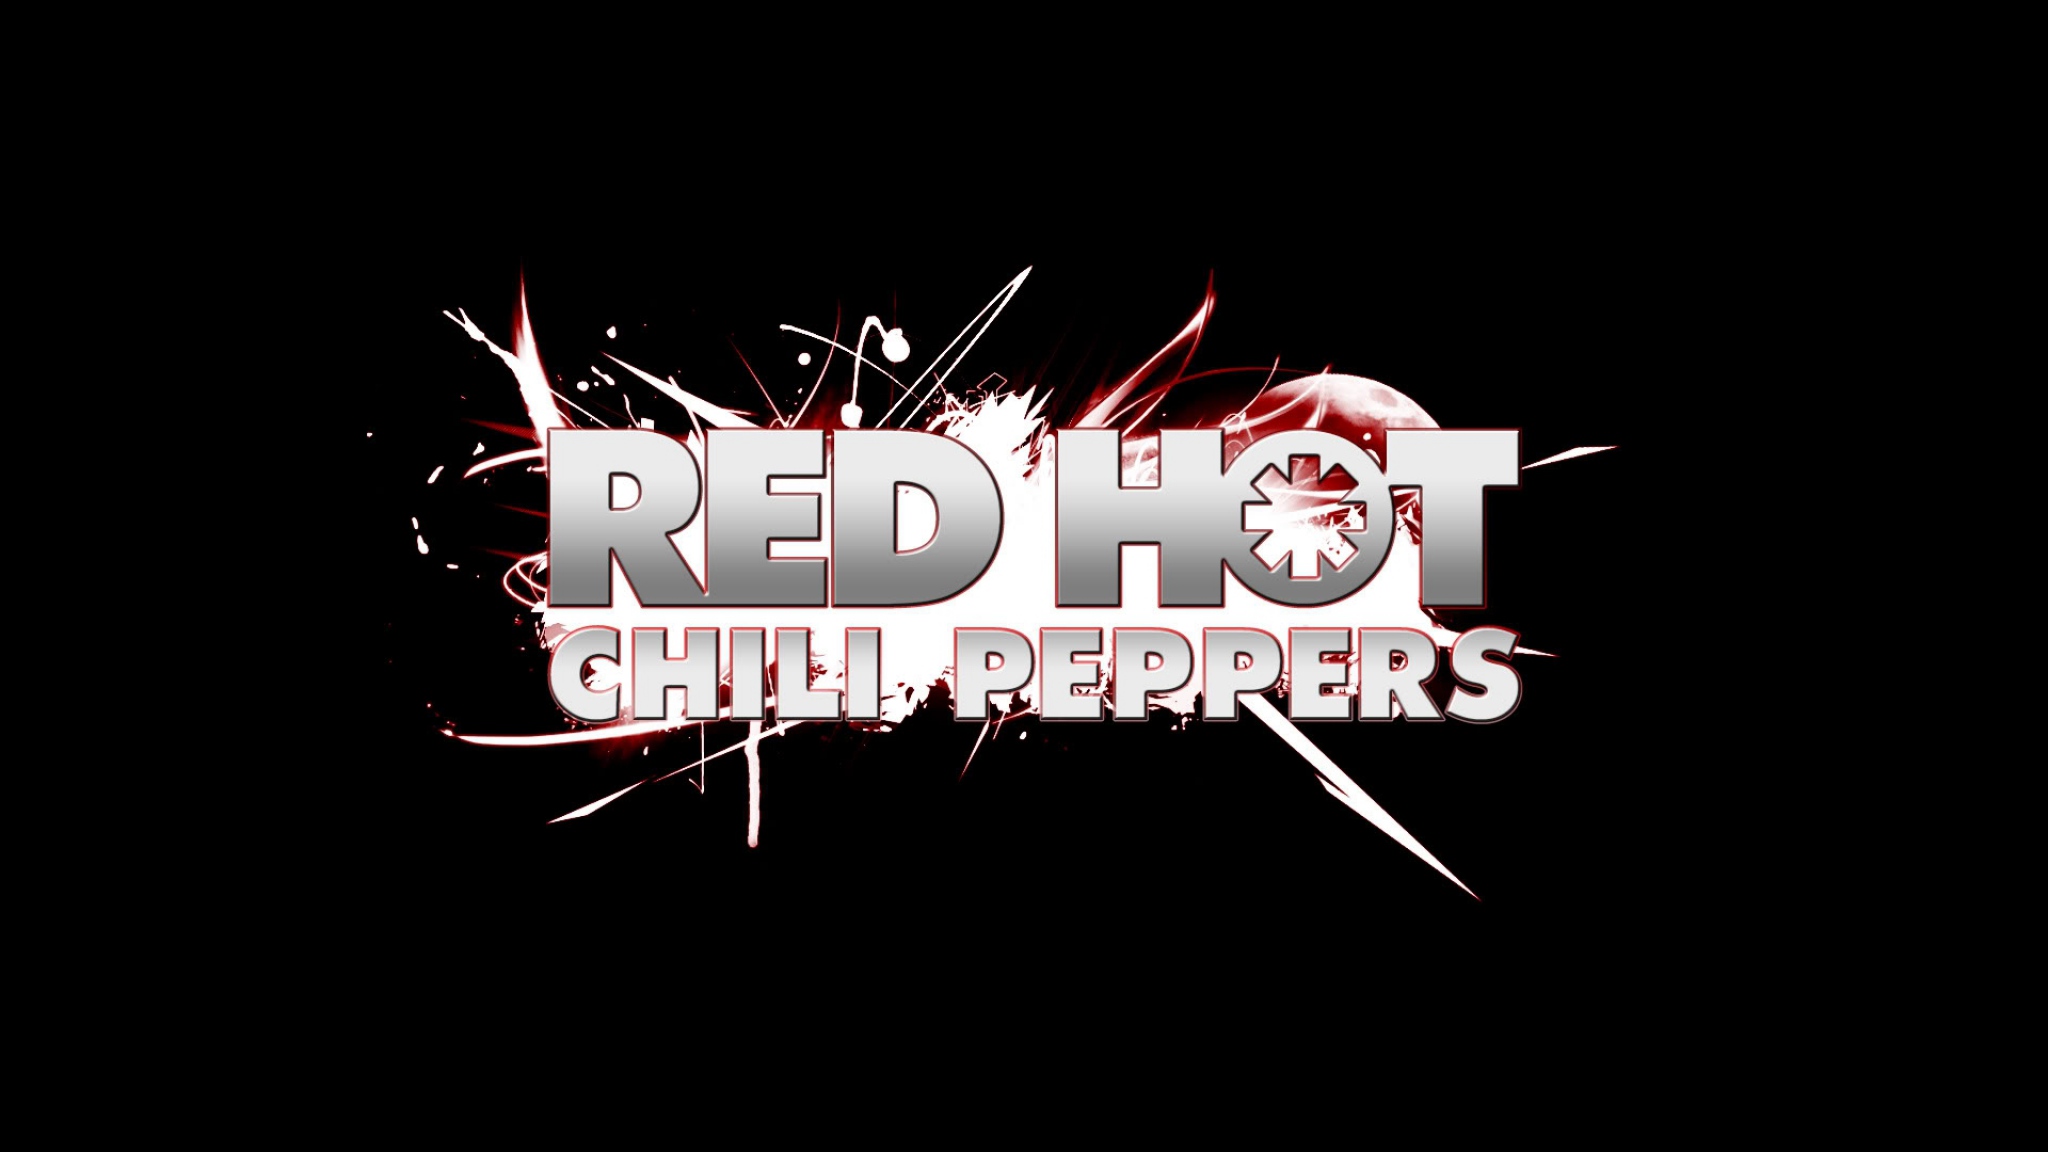 HD Red hot chili peppers Wallpapers HD, Desktop Backgrounds 2048x1152